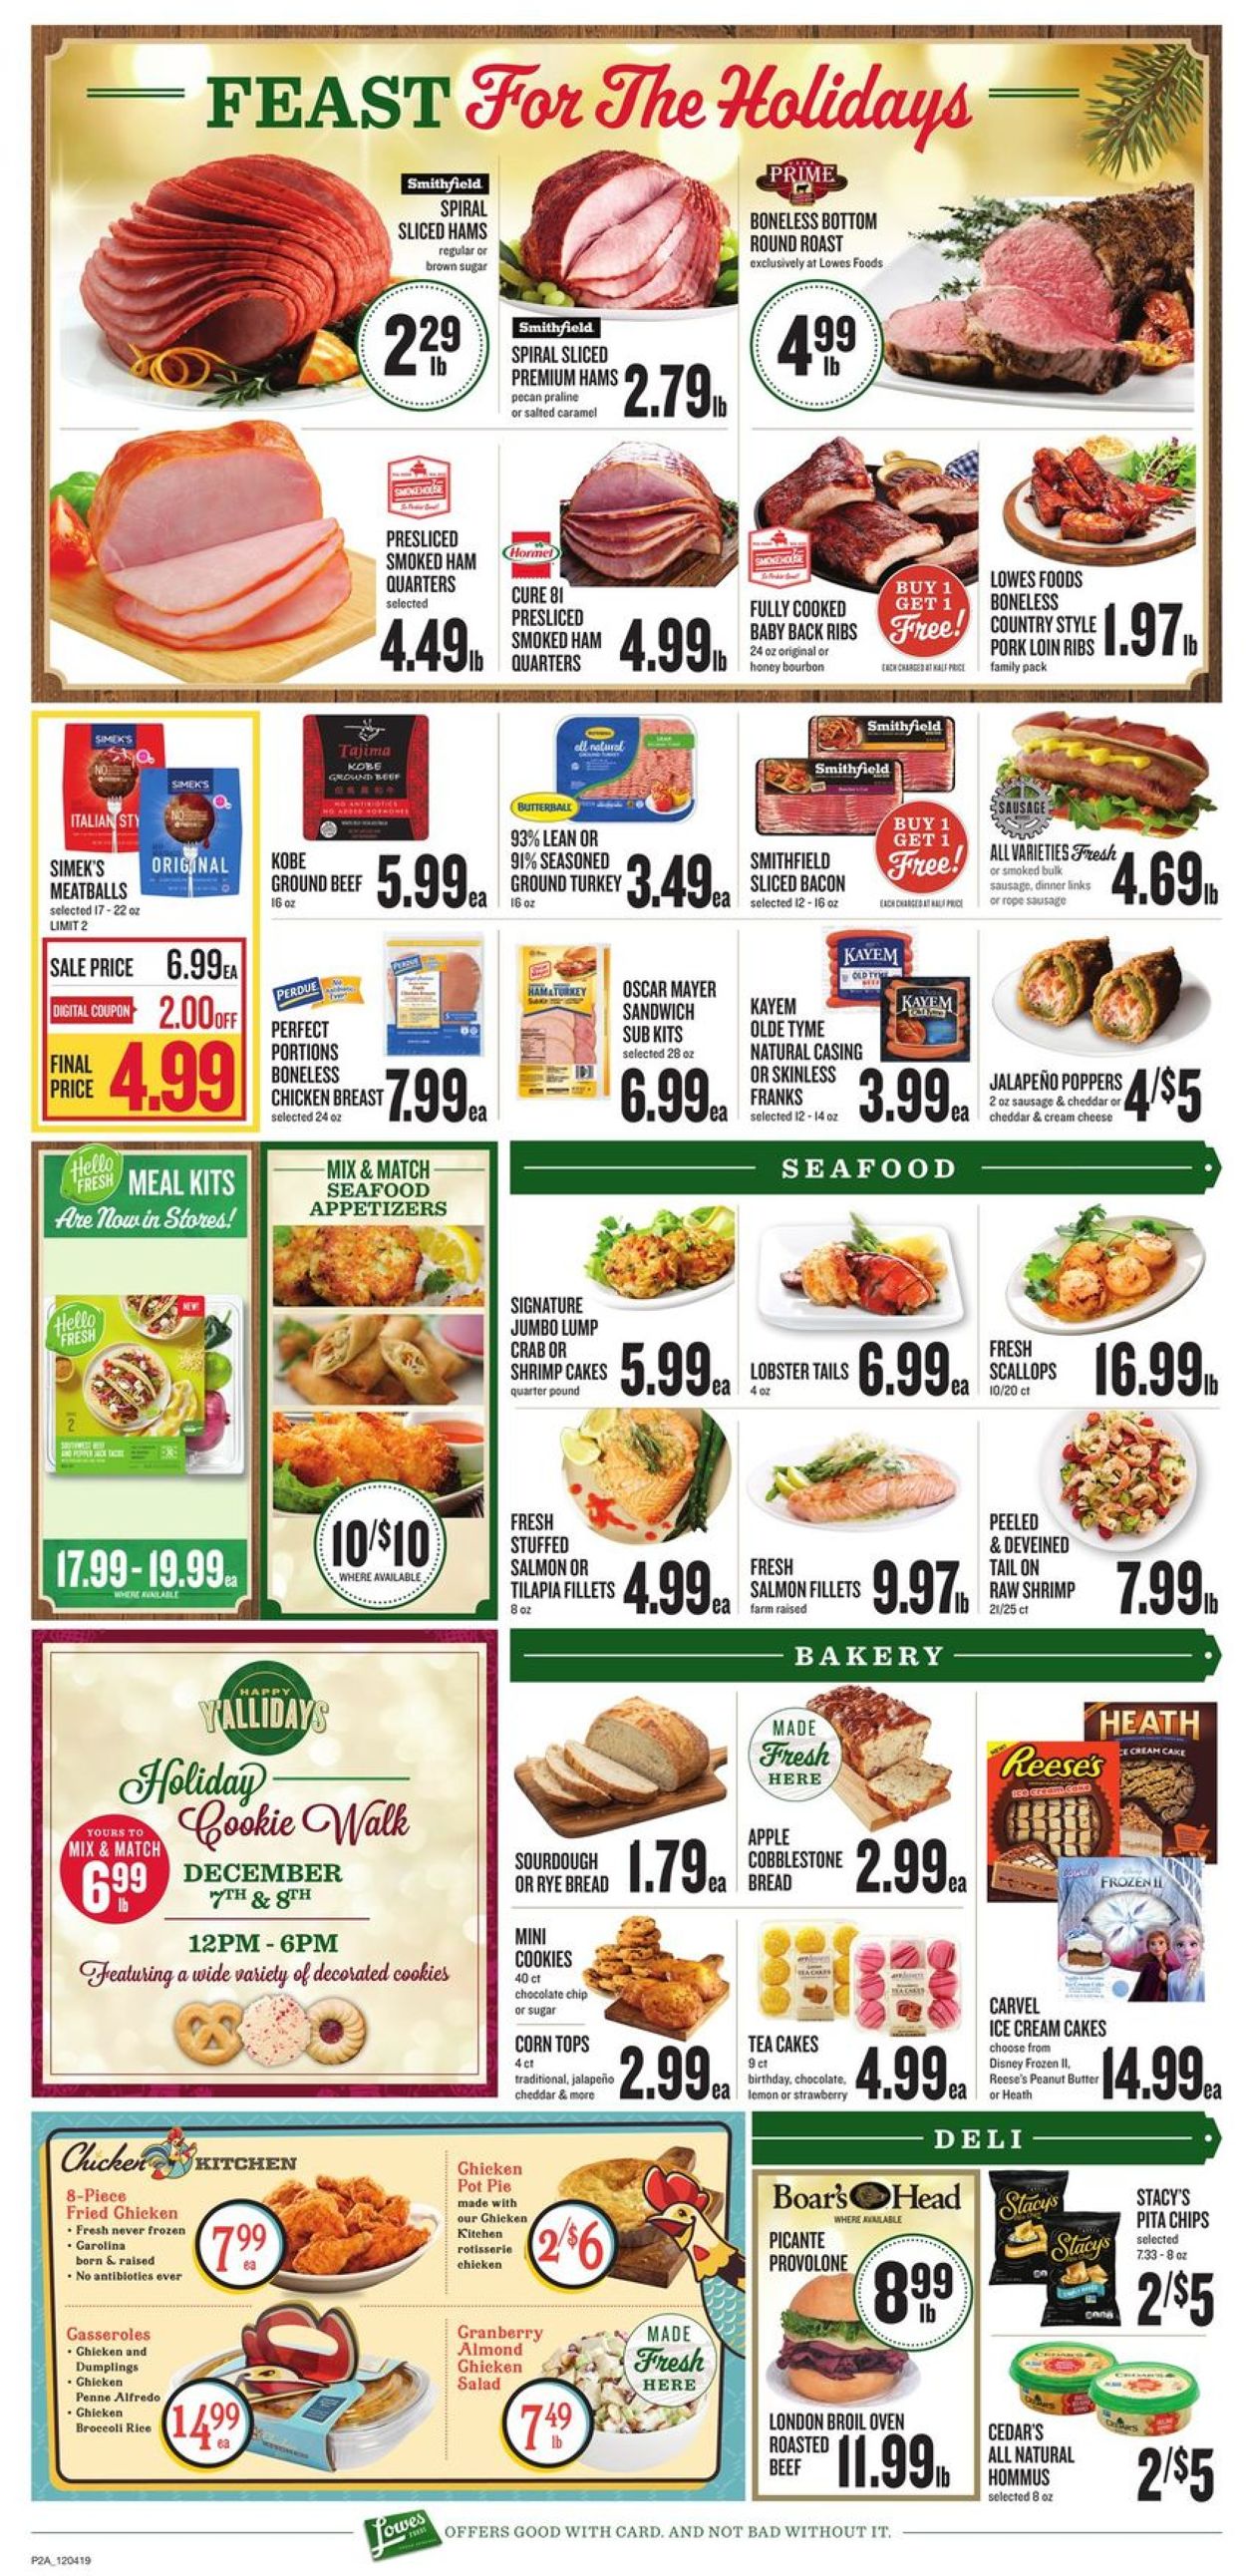 Lowes Foods - Holidays Ad 2019 Weekly Ad Circular - valid 12/04-12/10/2019 (Page 3)